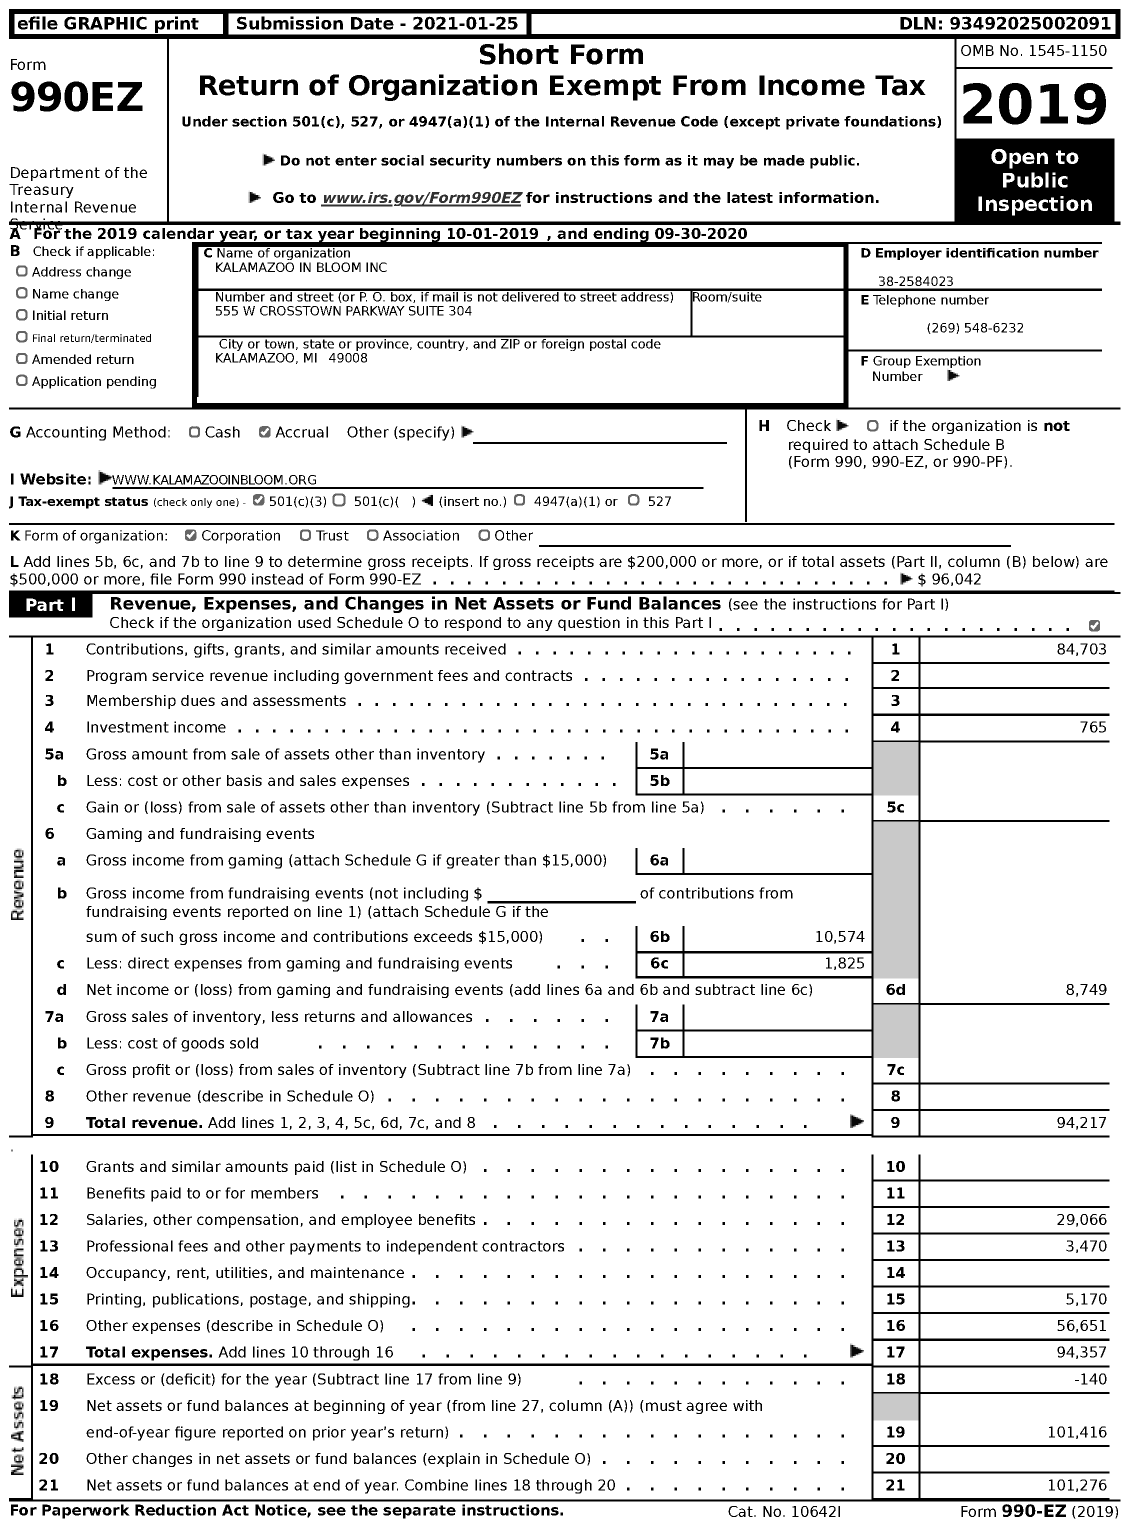 Image of first page of 2019 Form 990EZ for Kalamazoo in Bloom